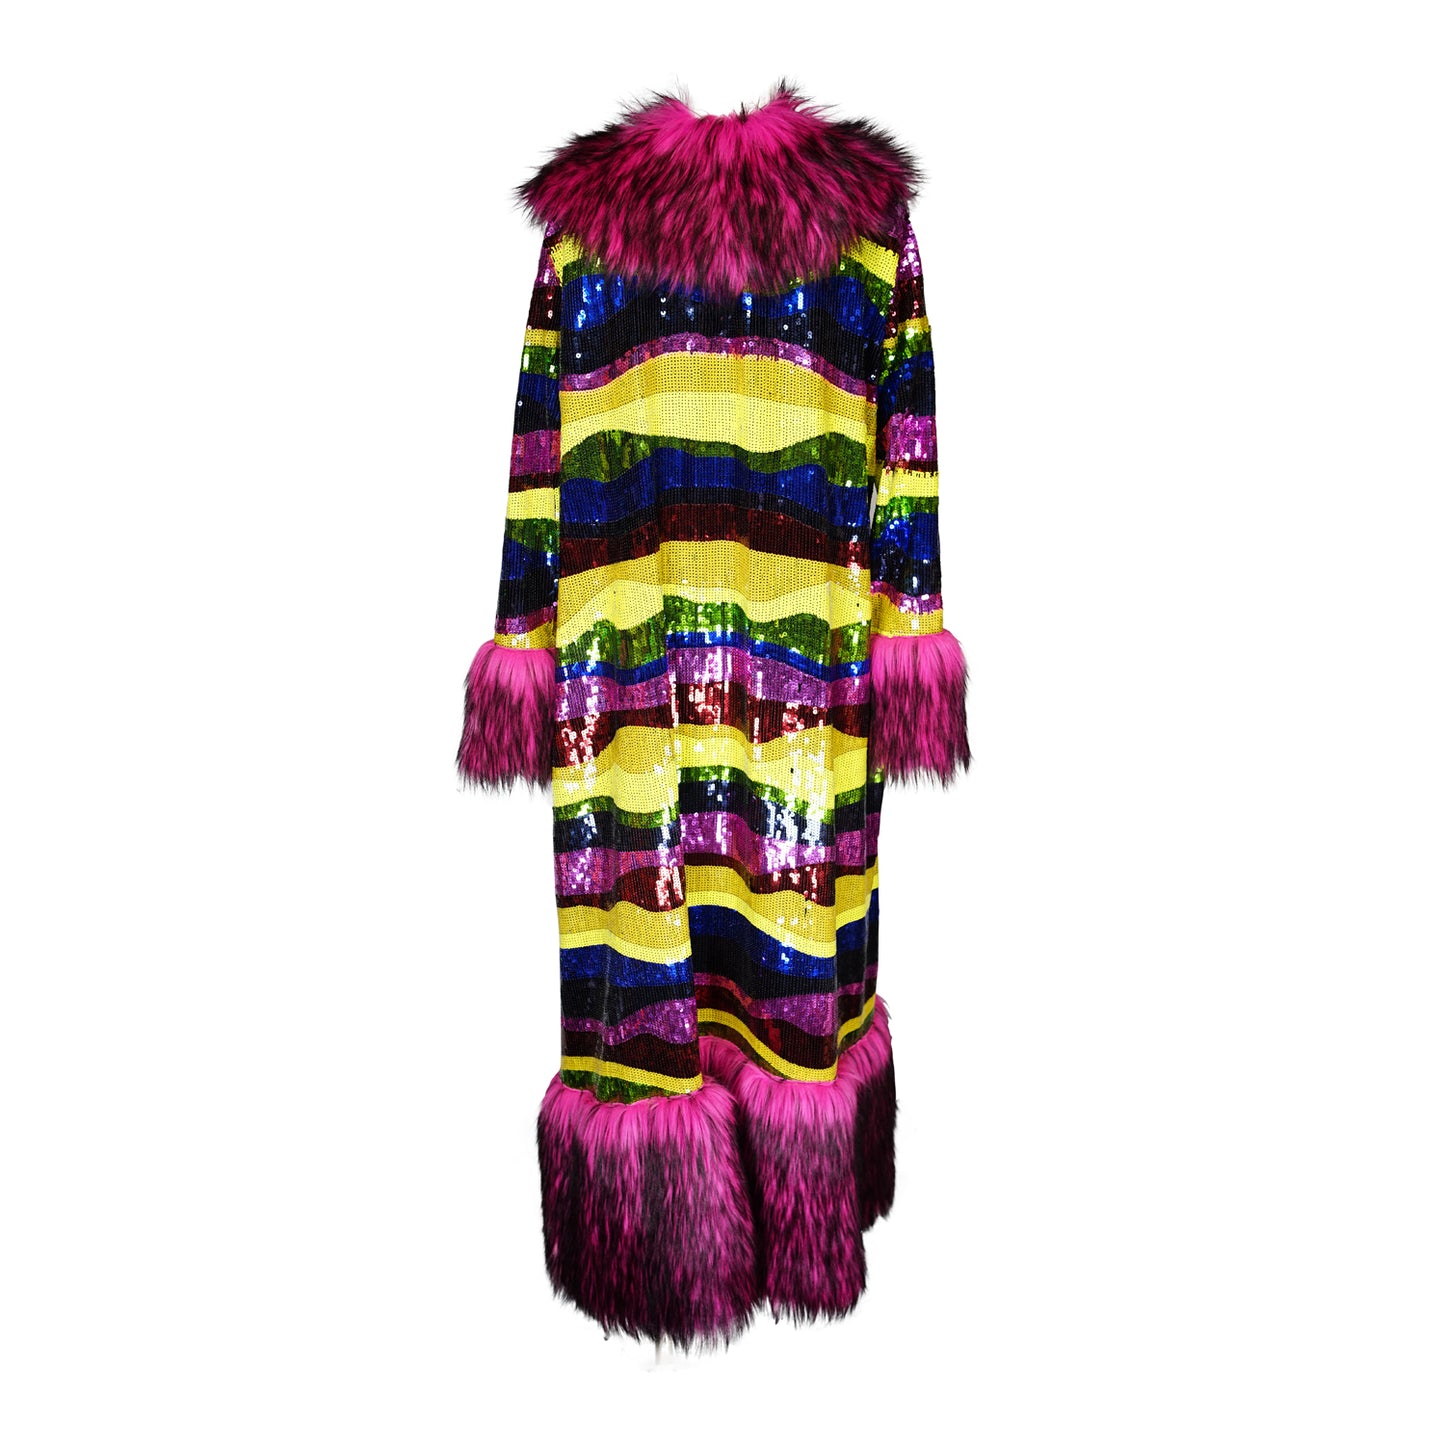 jennafer grace Rainbow Road Sequin deluxe penny lane faux fur duster jacket coat almost famous klaus hargreeves rainbow striped sequins colorful stripes hot pink fuchsia and black faux fur elton john inspired boho bohemian hippie romantic whimsical retro opera coat 70s revival 1970s unisex handmade in California USA